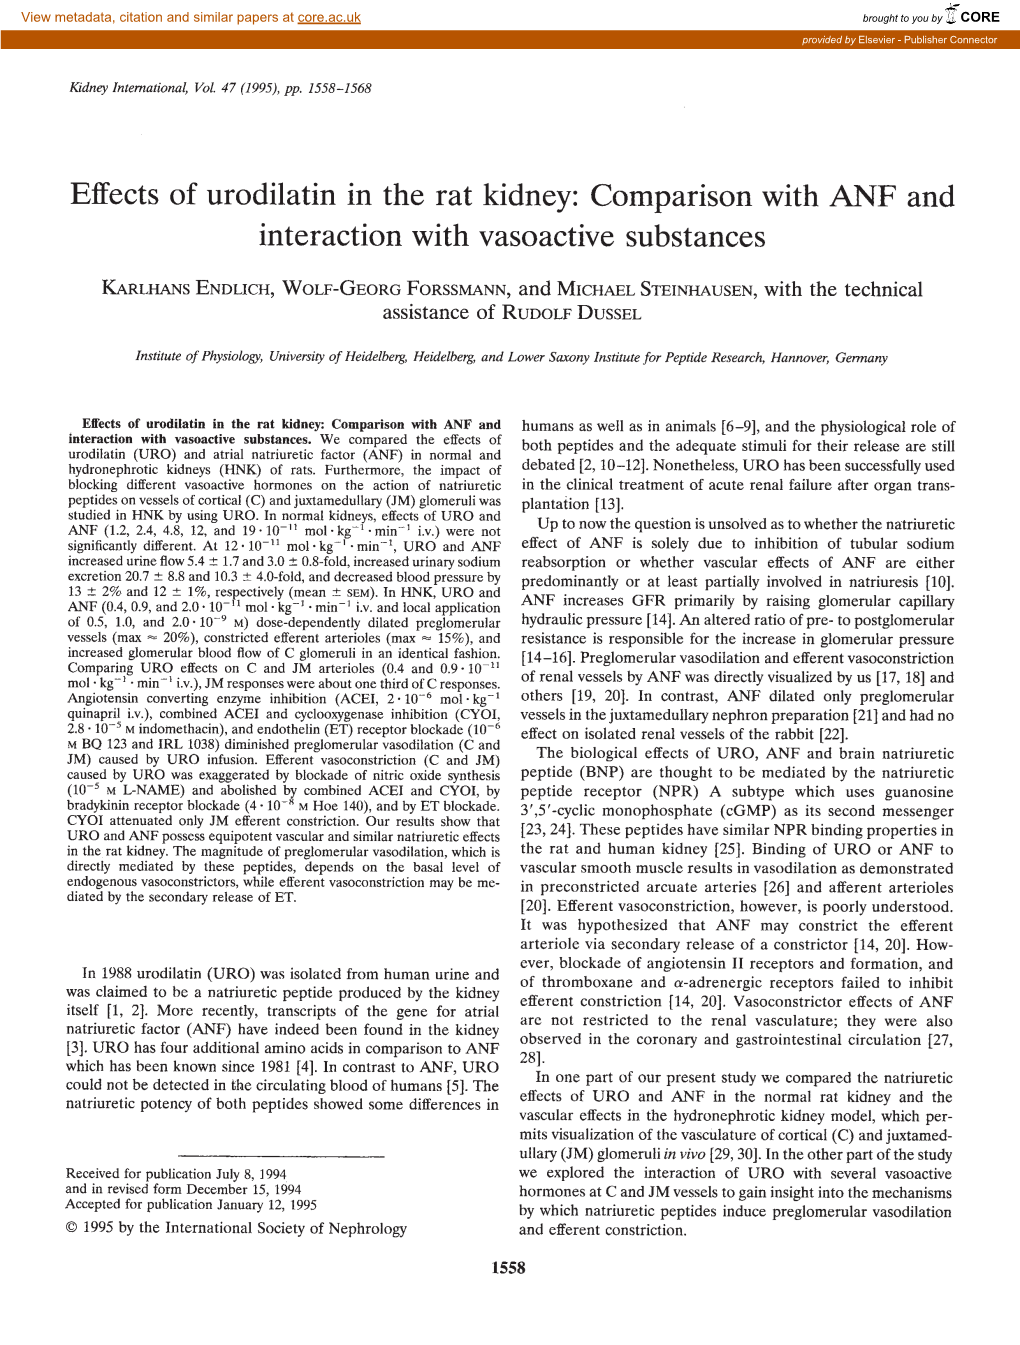 Effects of Urodilatin in the Rat Kidney: Comparison with Anfand Interaction with Vasoactive Substances